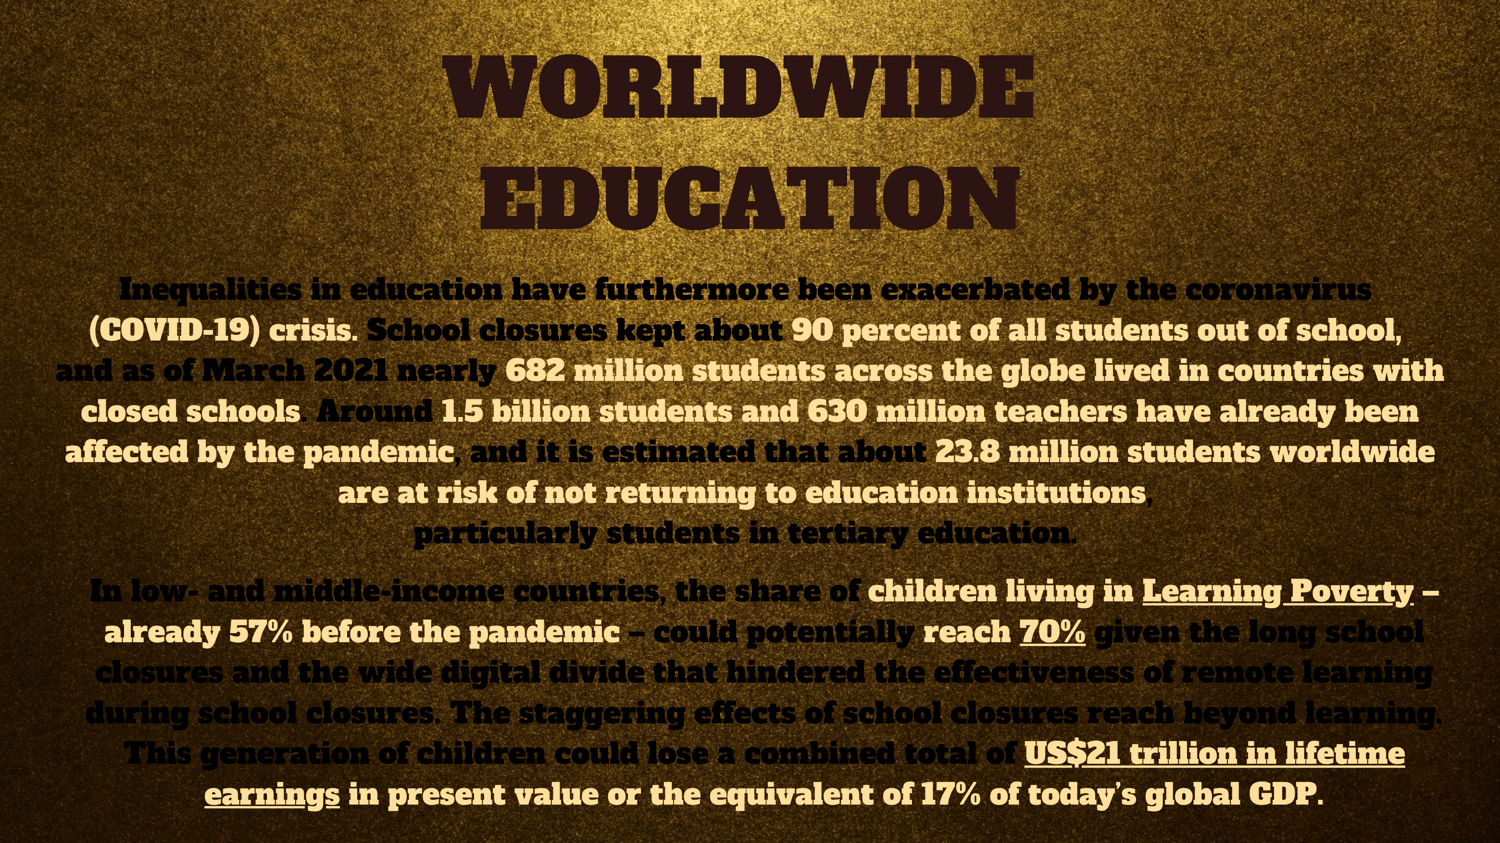 Global Education Issues, problems, challenges